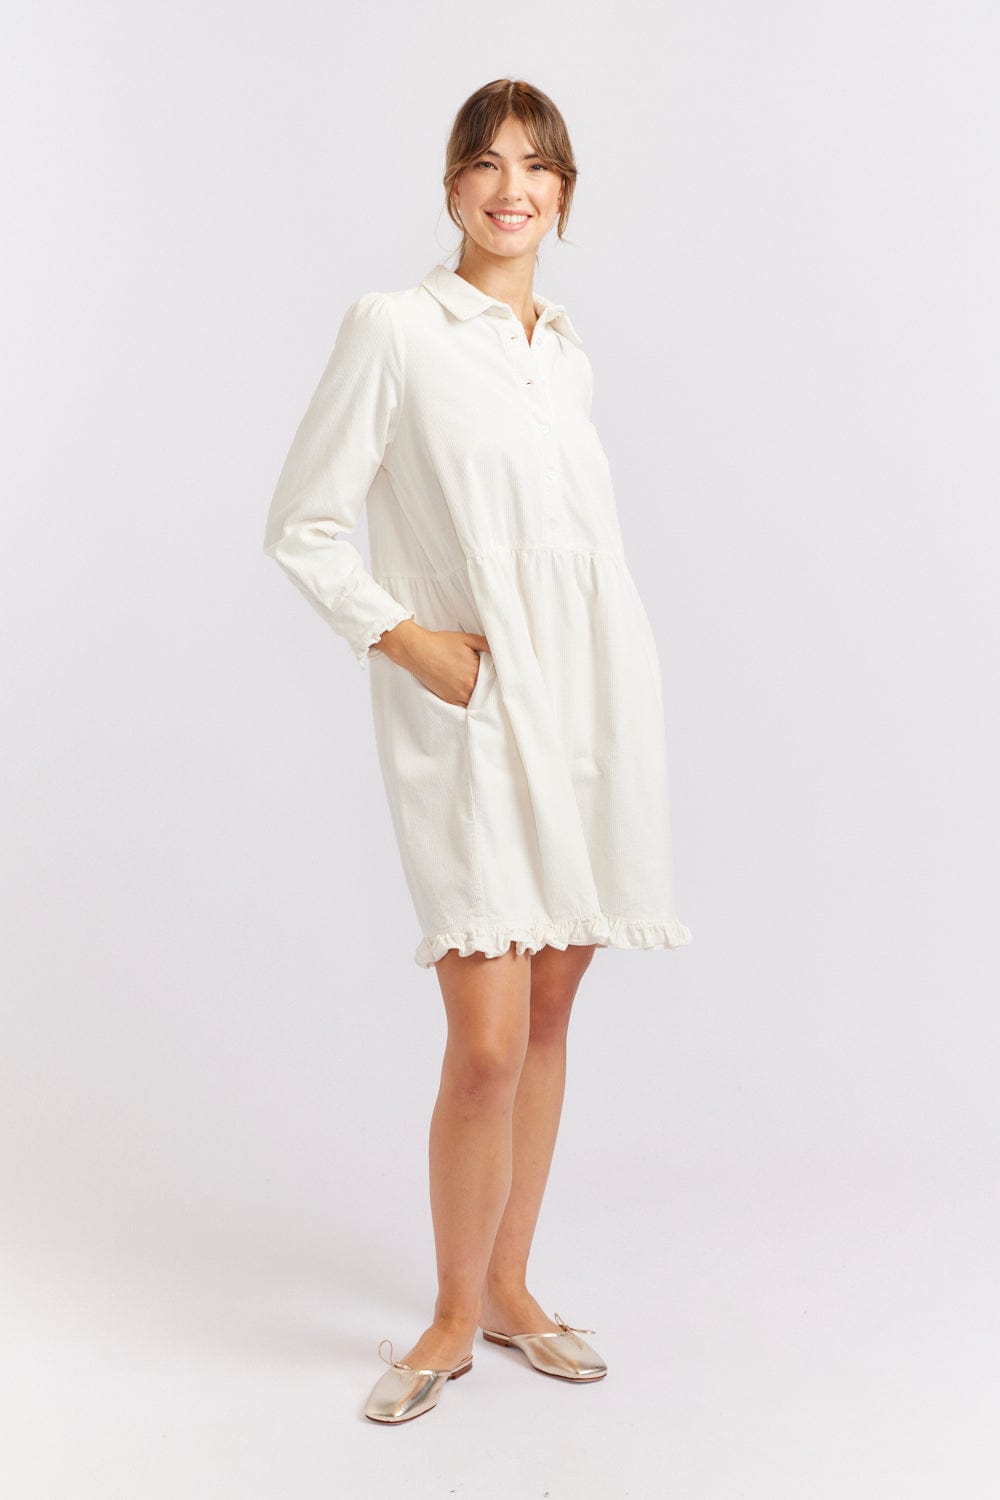 Alessandra Willow Corduroy Dress in Ivory White